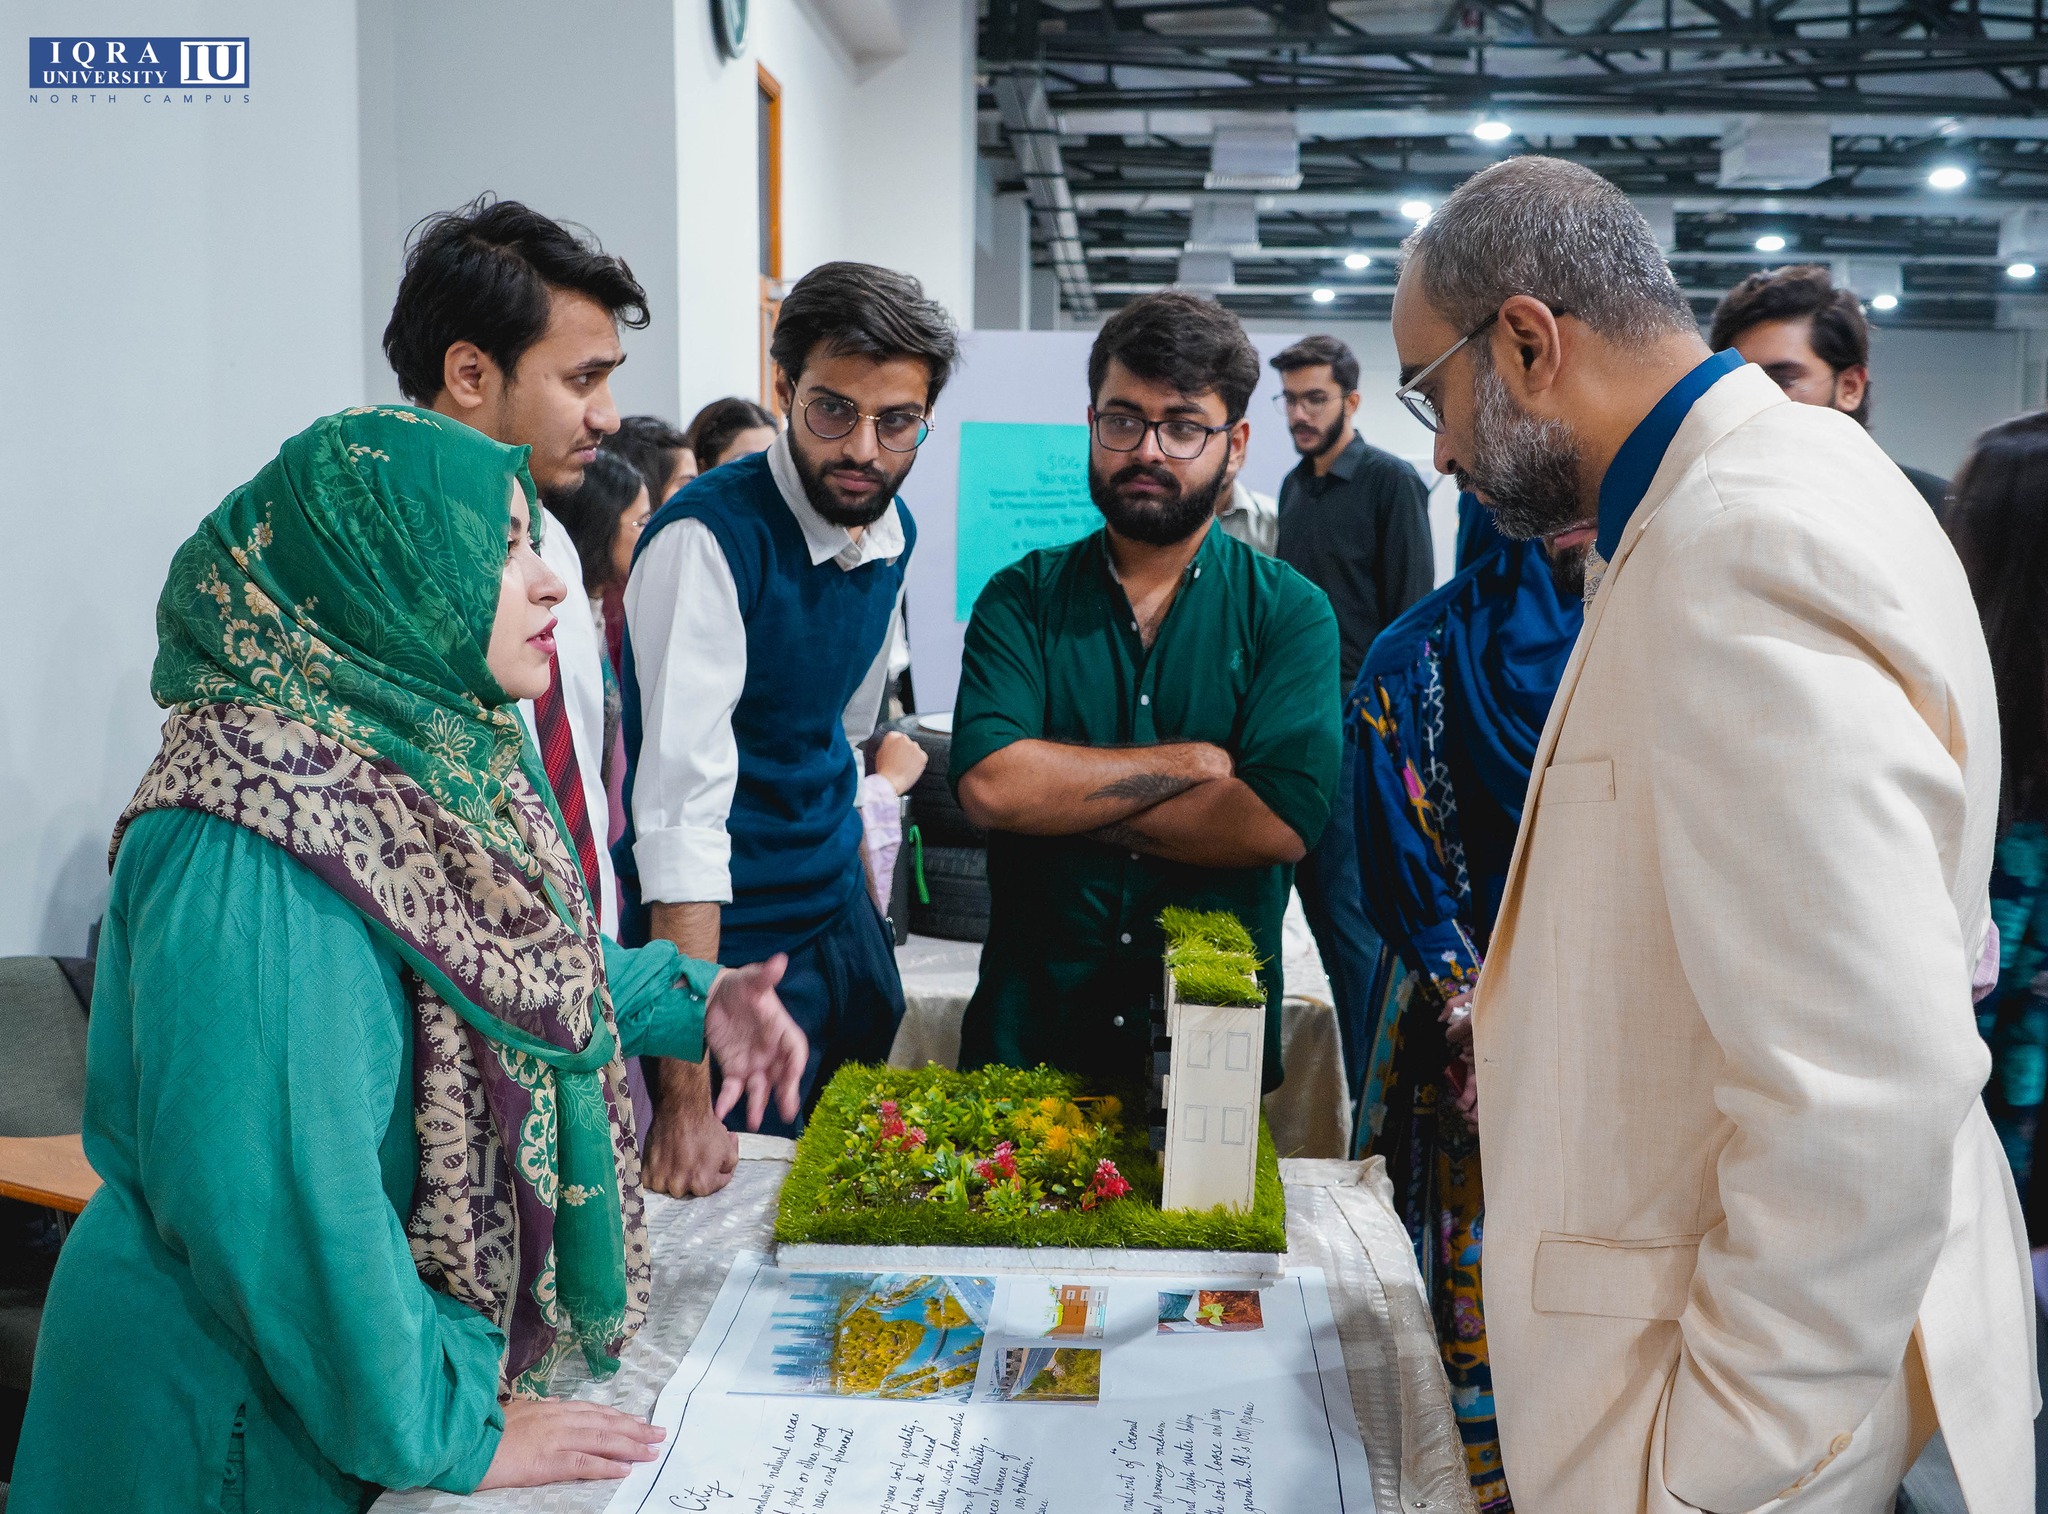 Project exhibition of environmental studies to promote sustainable practices